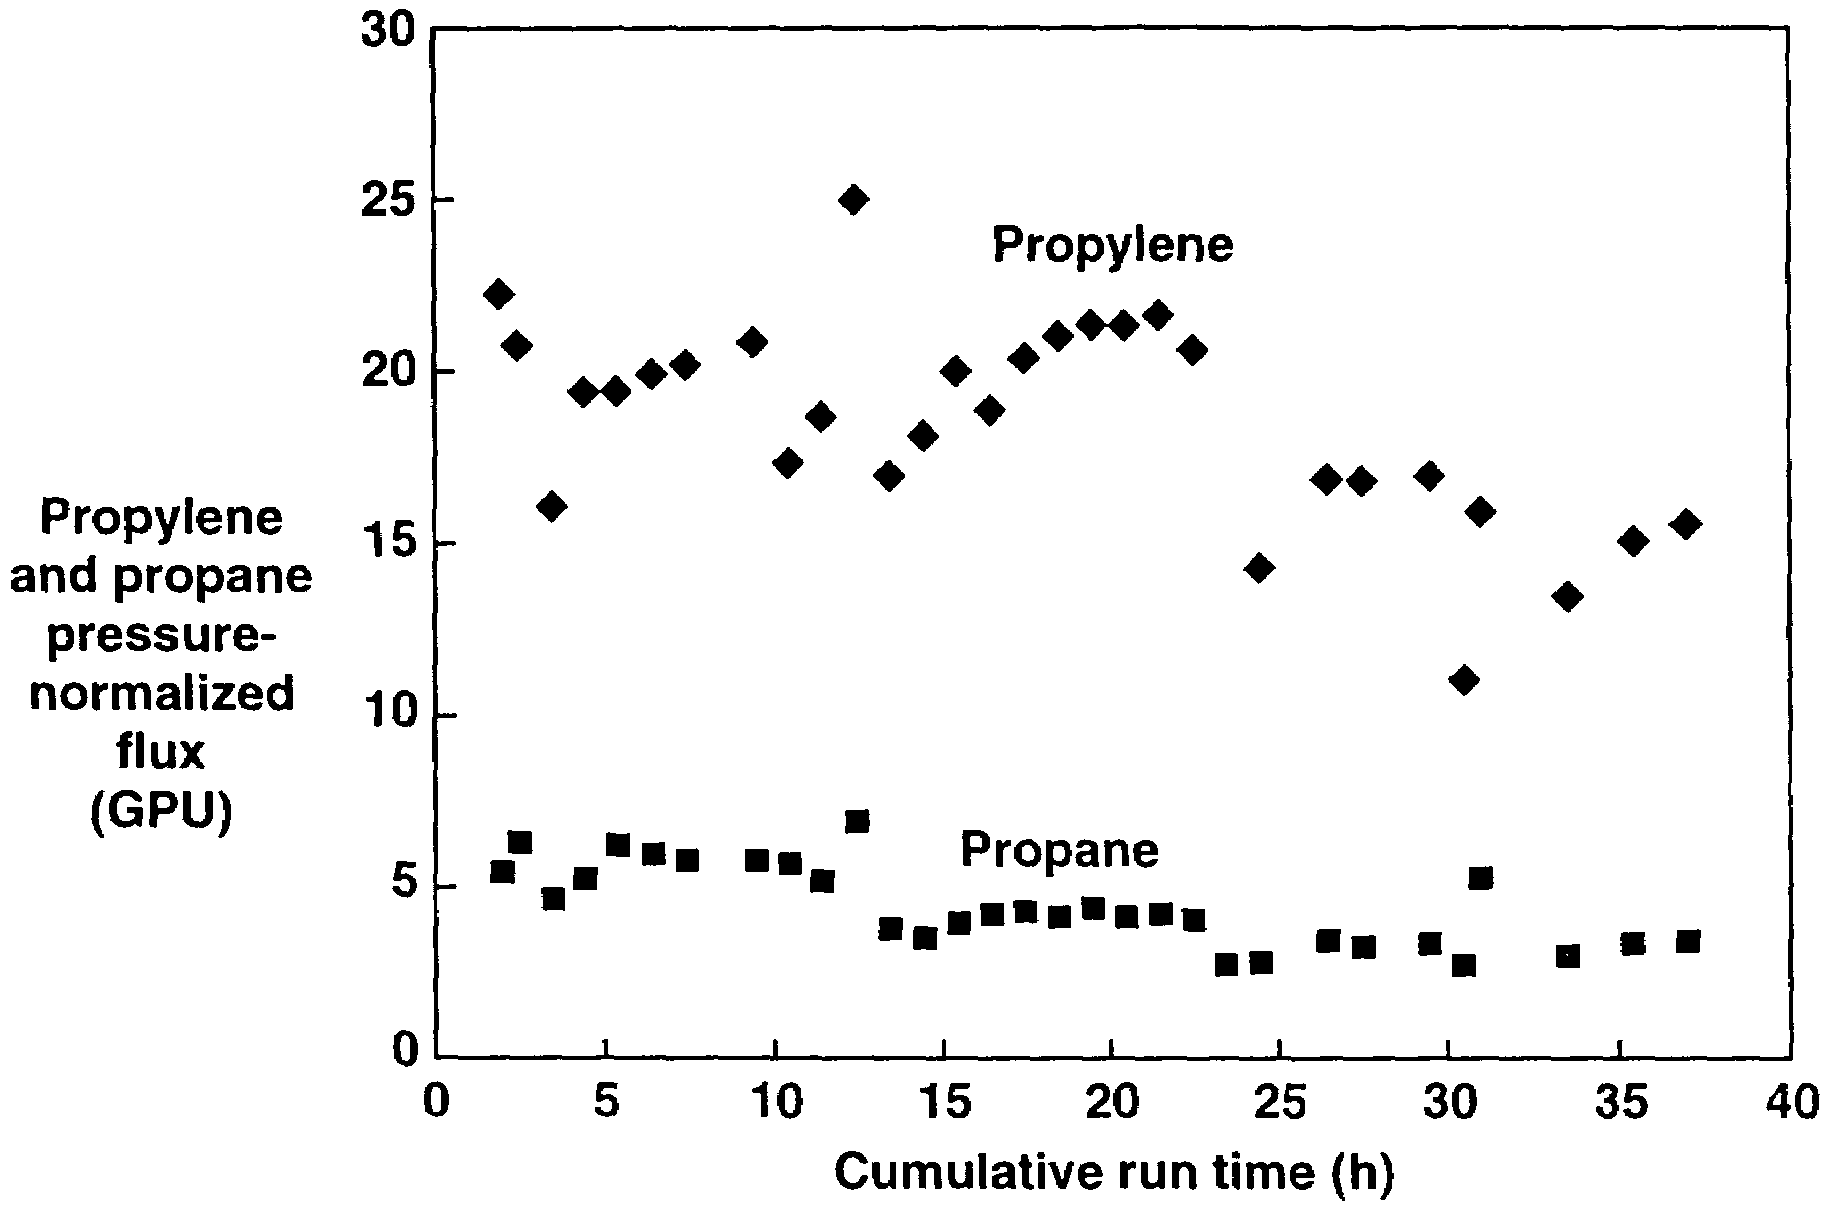 Liquid-phase separation of low molecular weight organic compounds